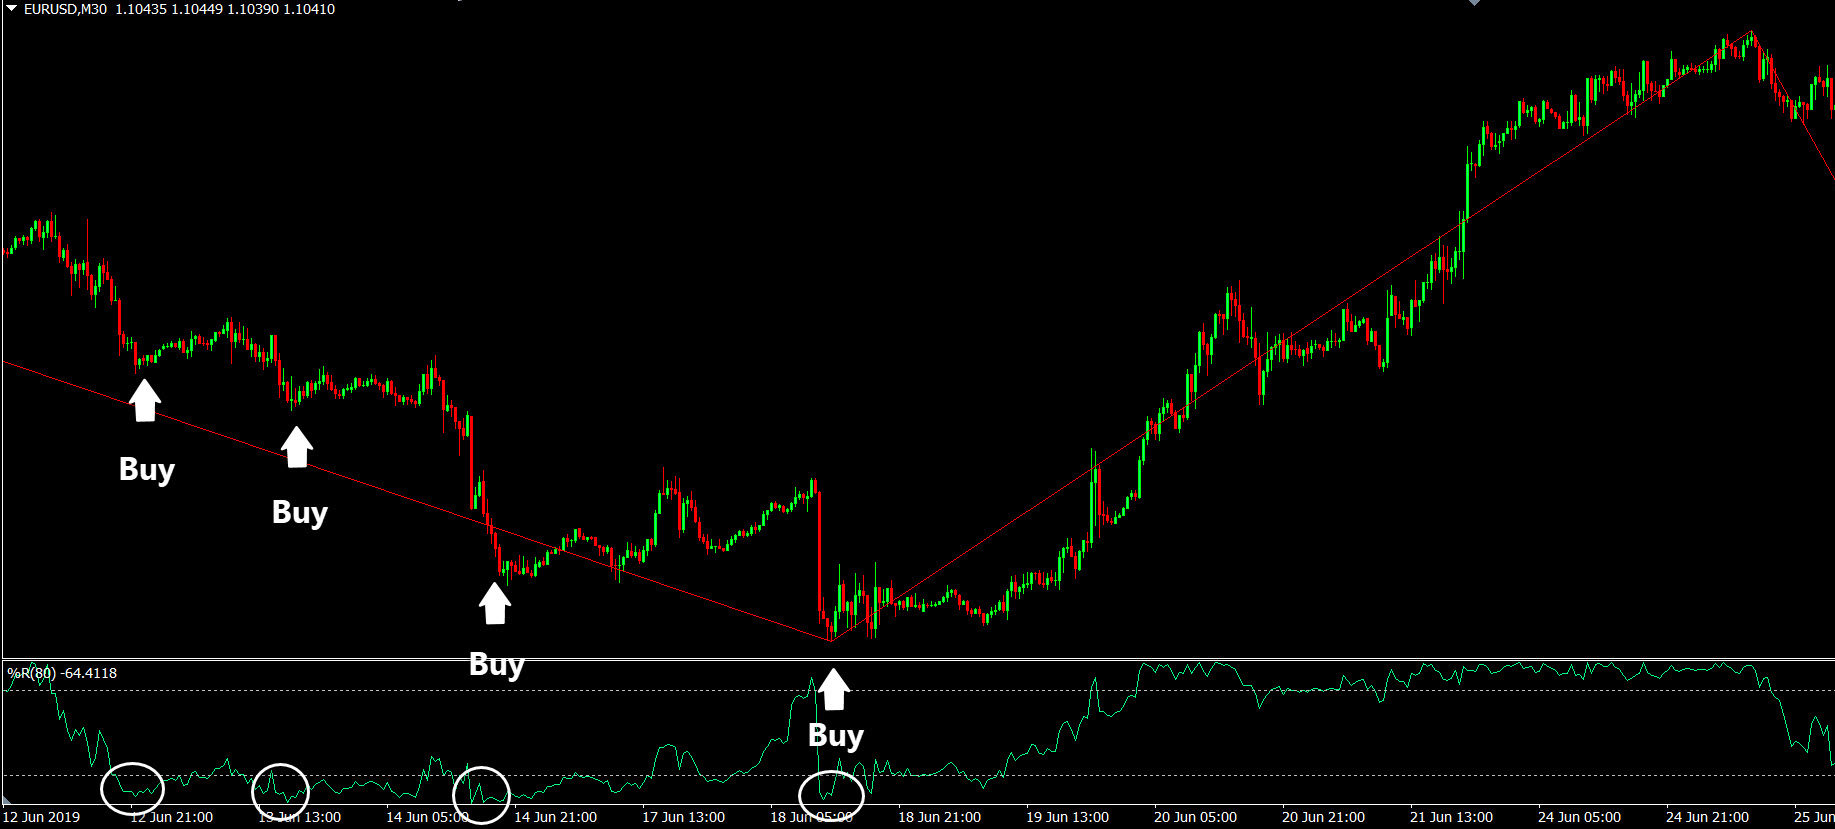 intraday trading strategies forex in thai